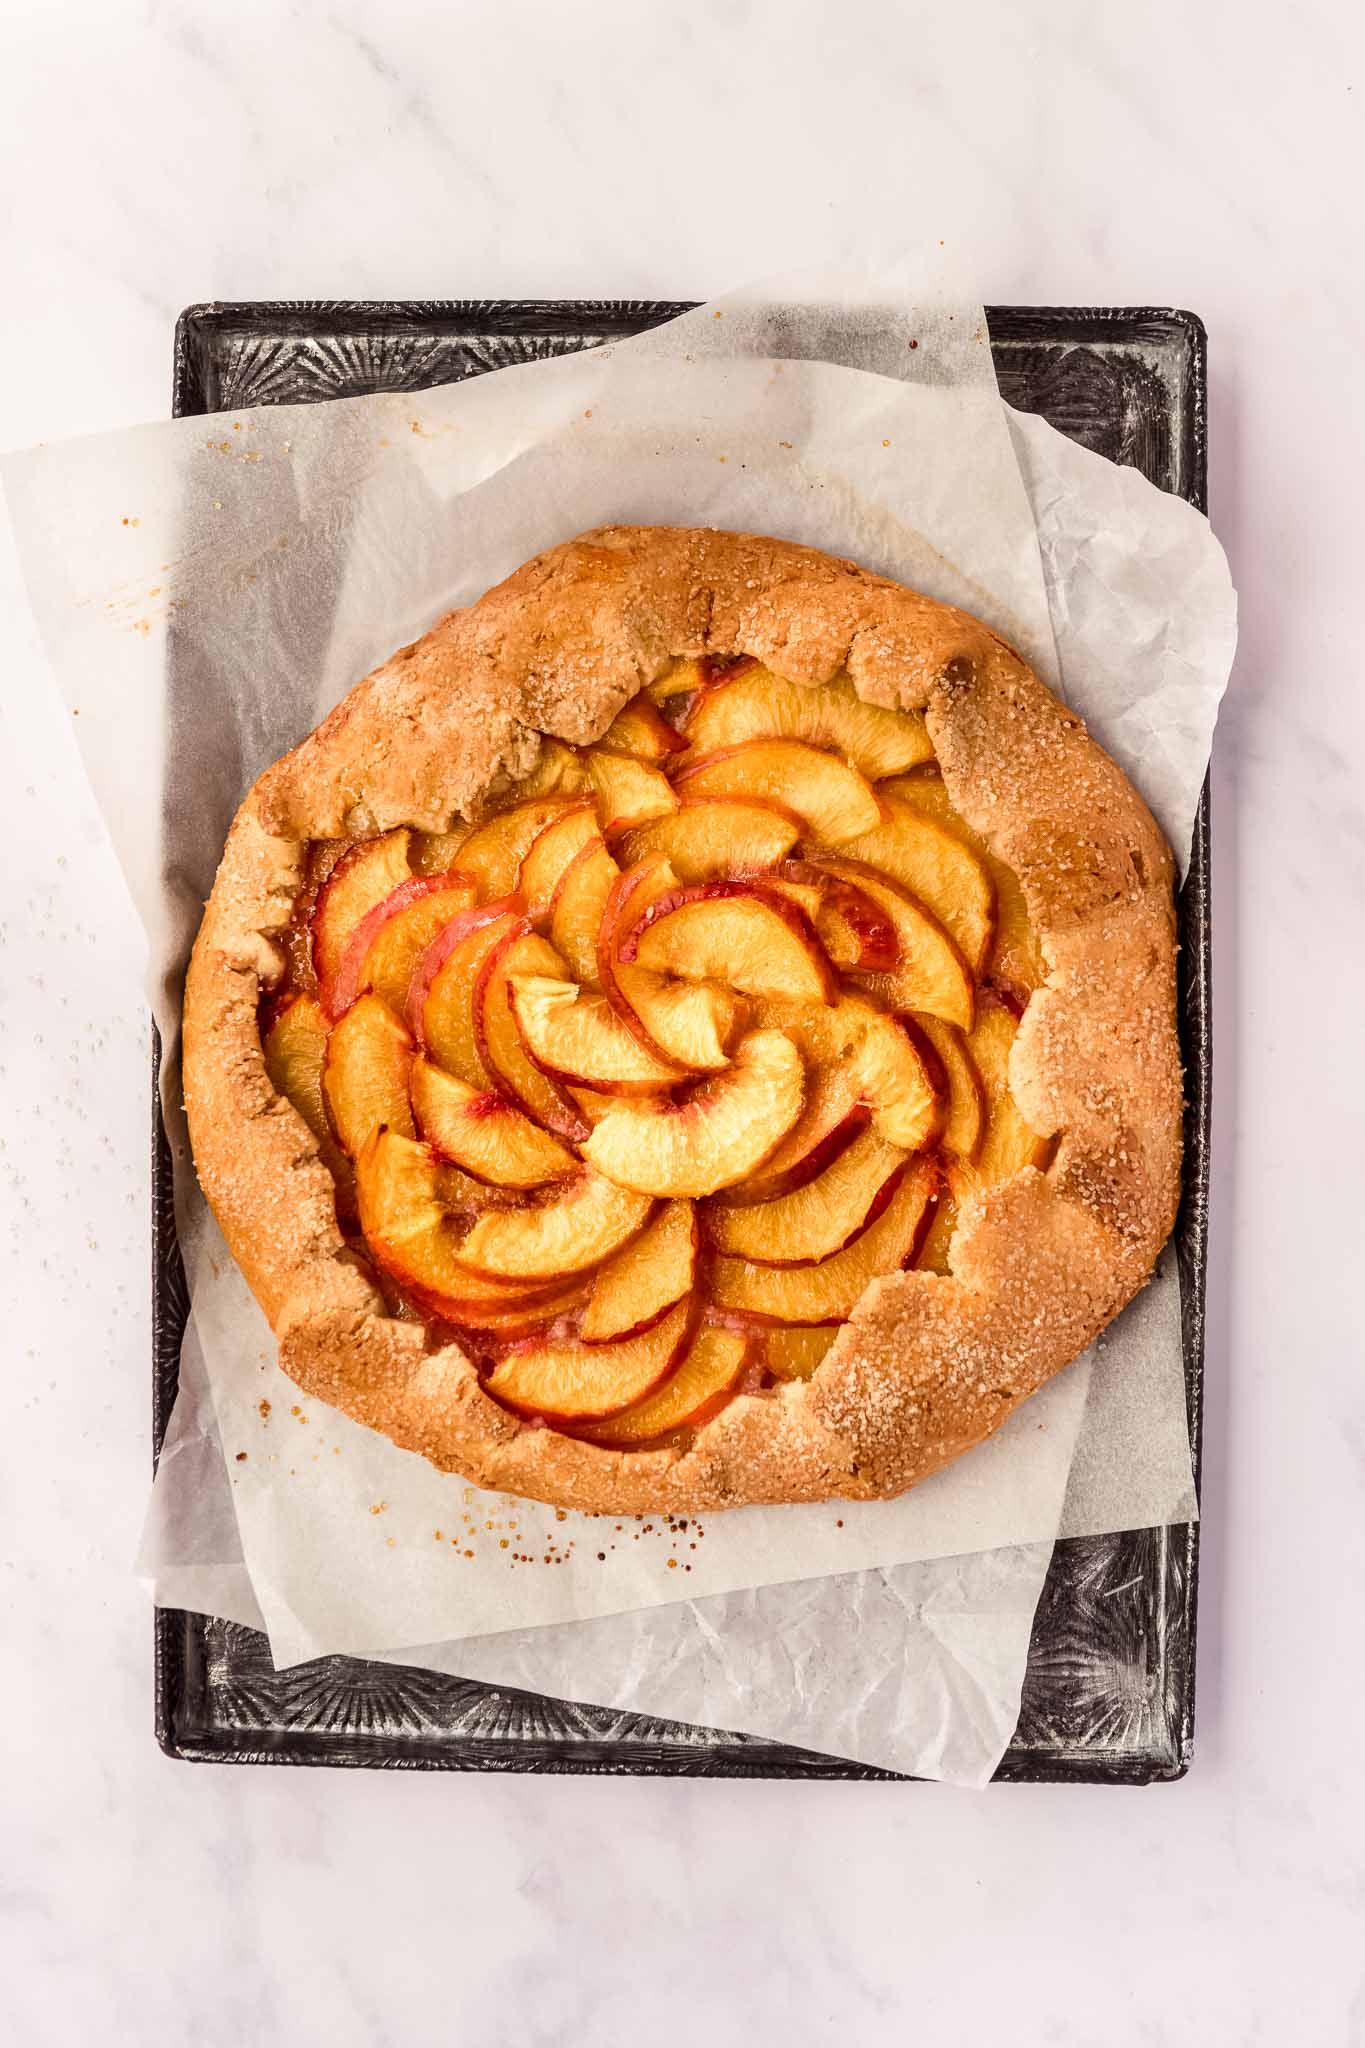 nectarine galette on a baking tray